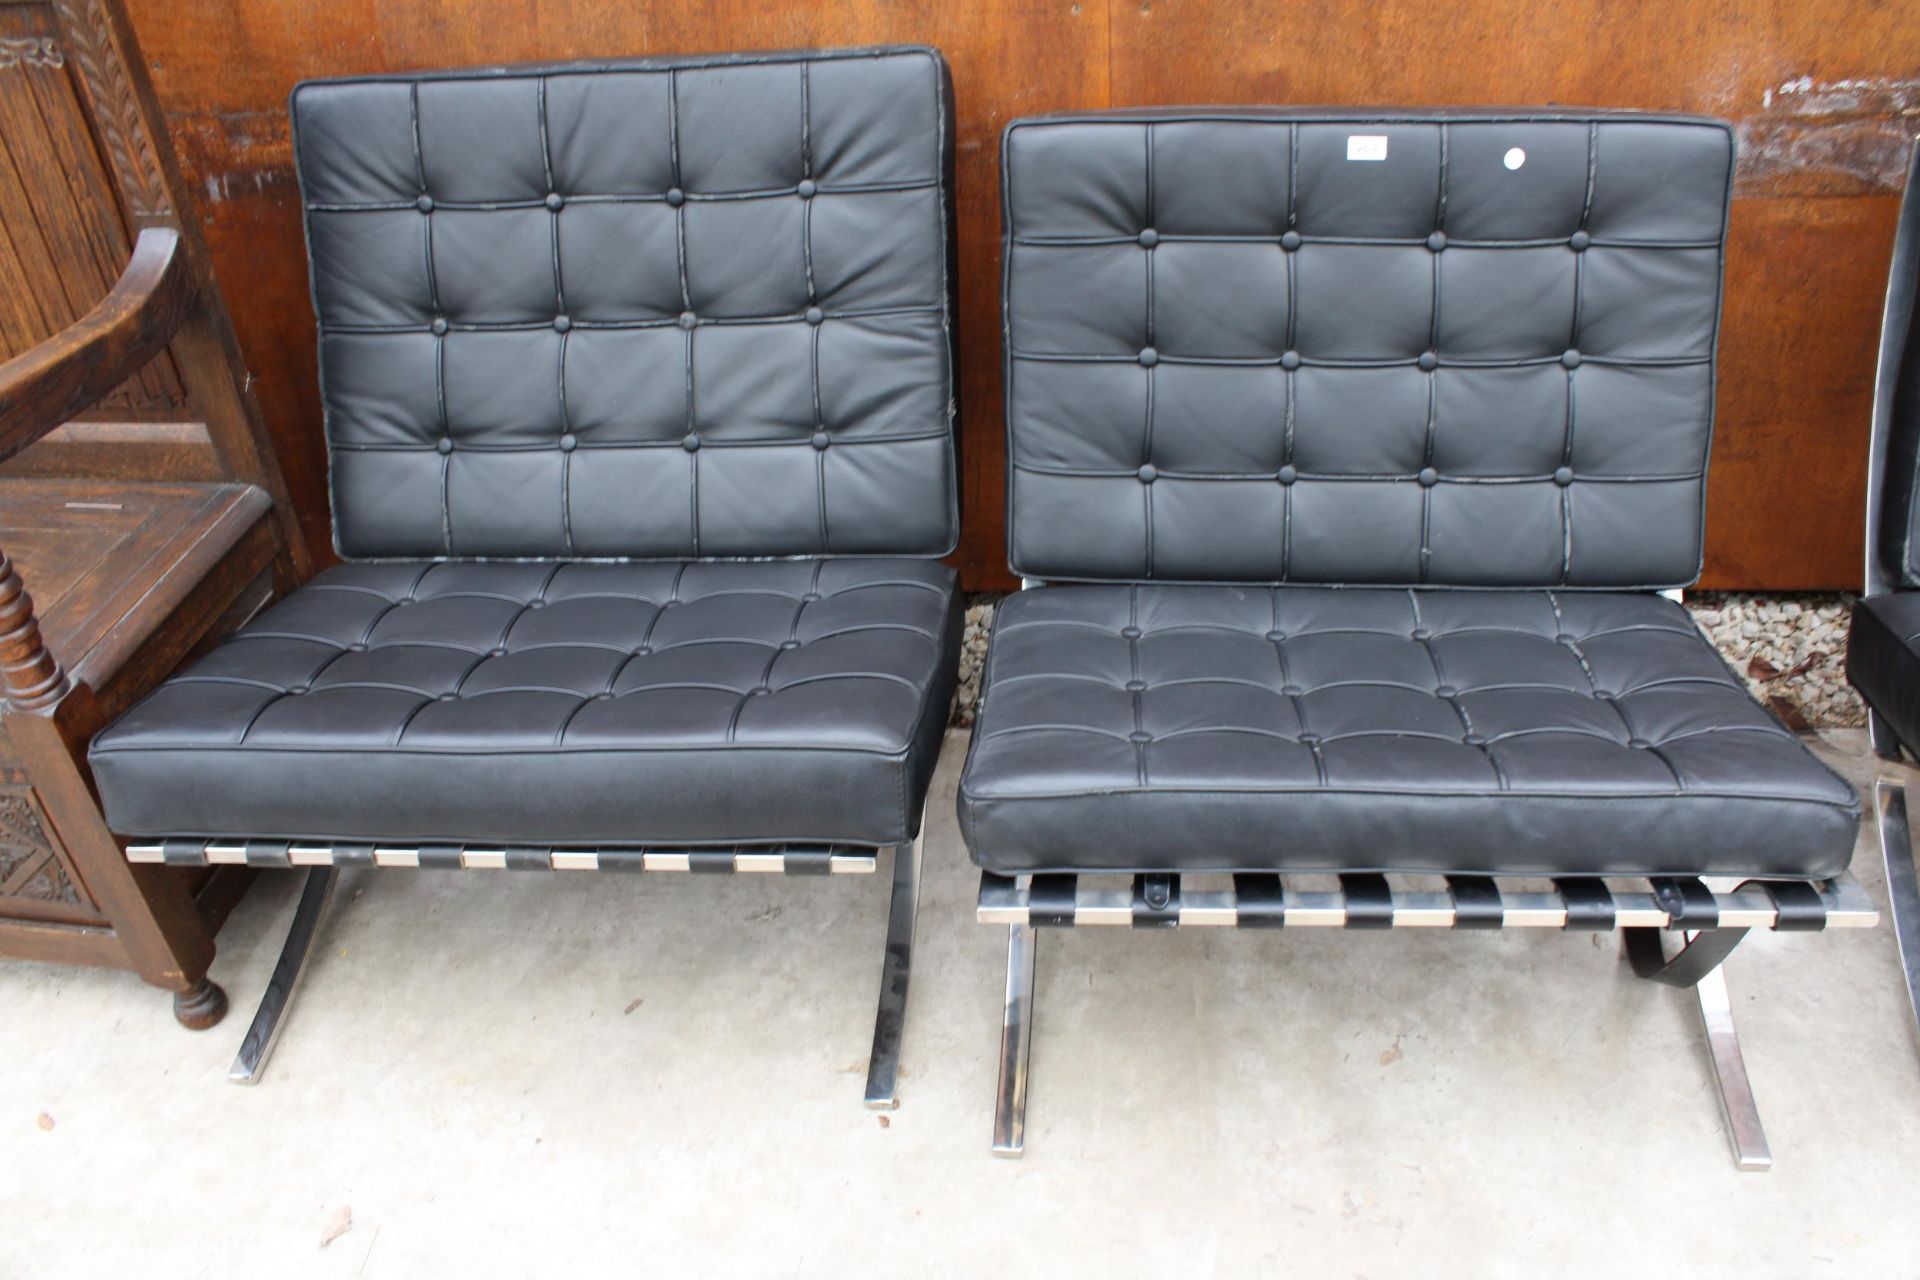 A PAIR OF BLACK BARCELONA STYLE CHAIRS ON POLISHED CHROME X FRAME LEGS